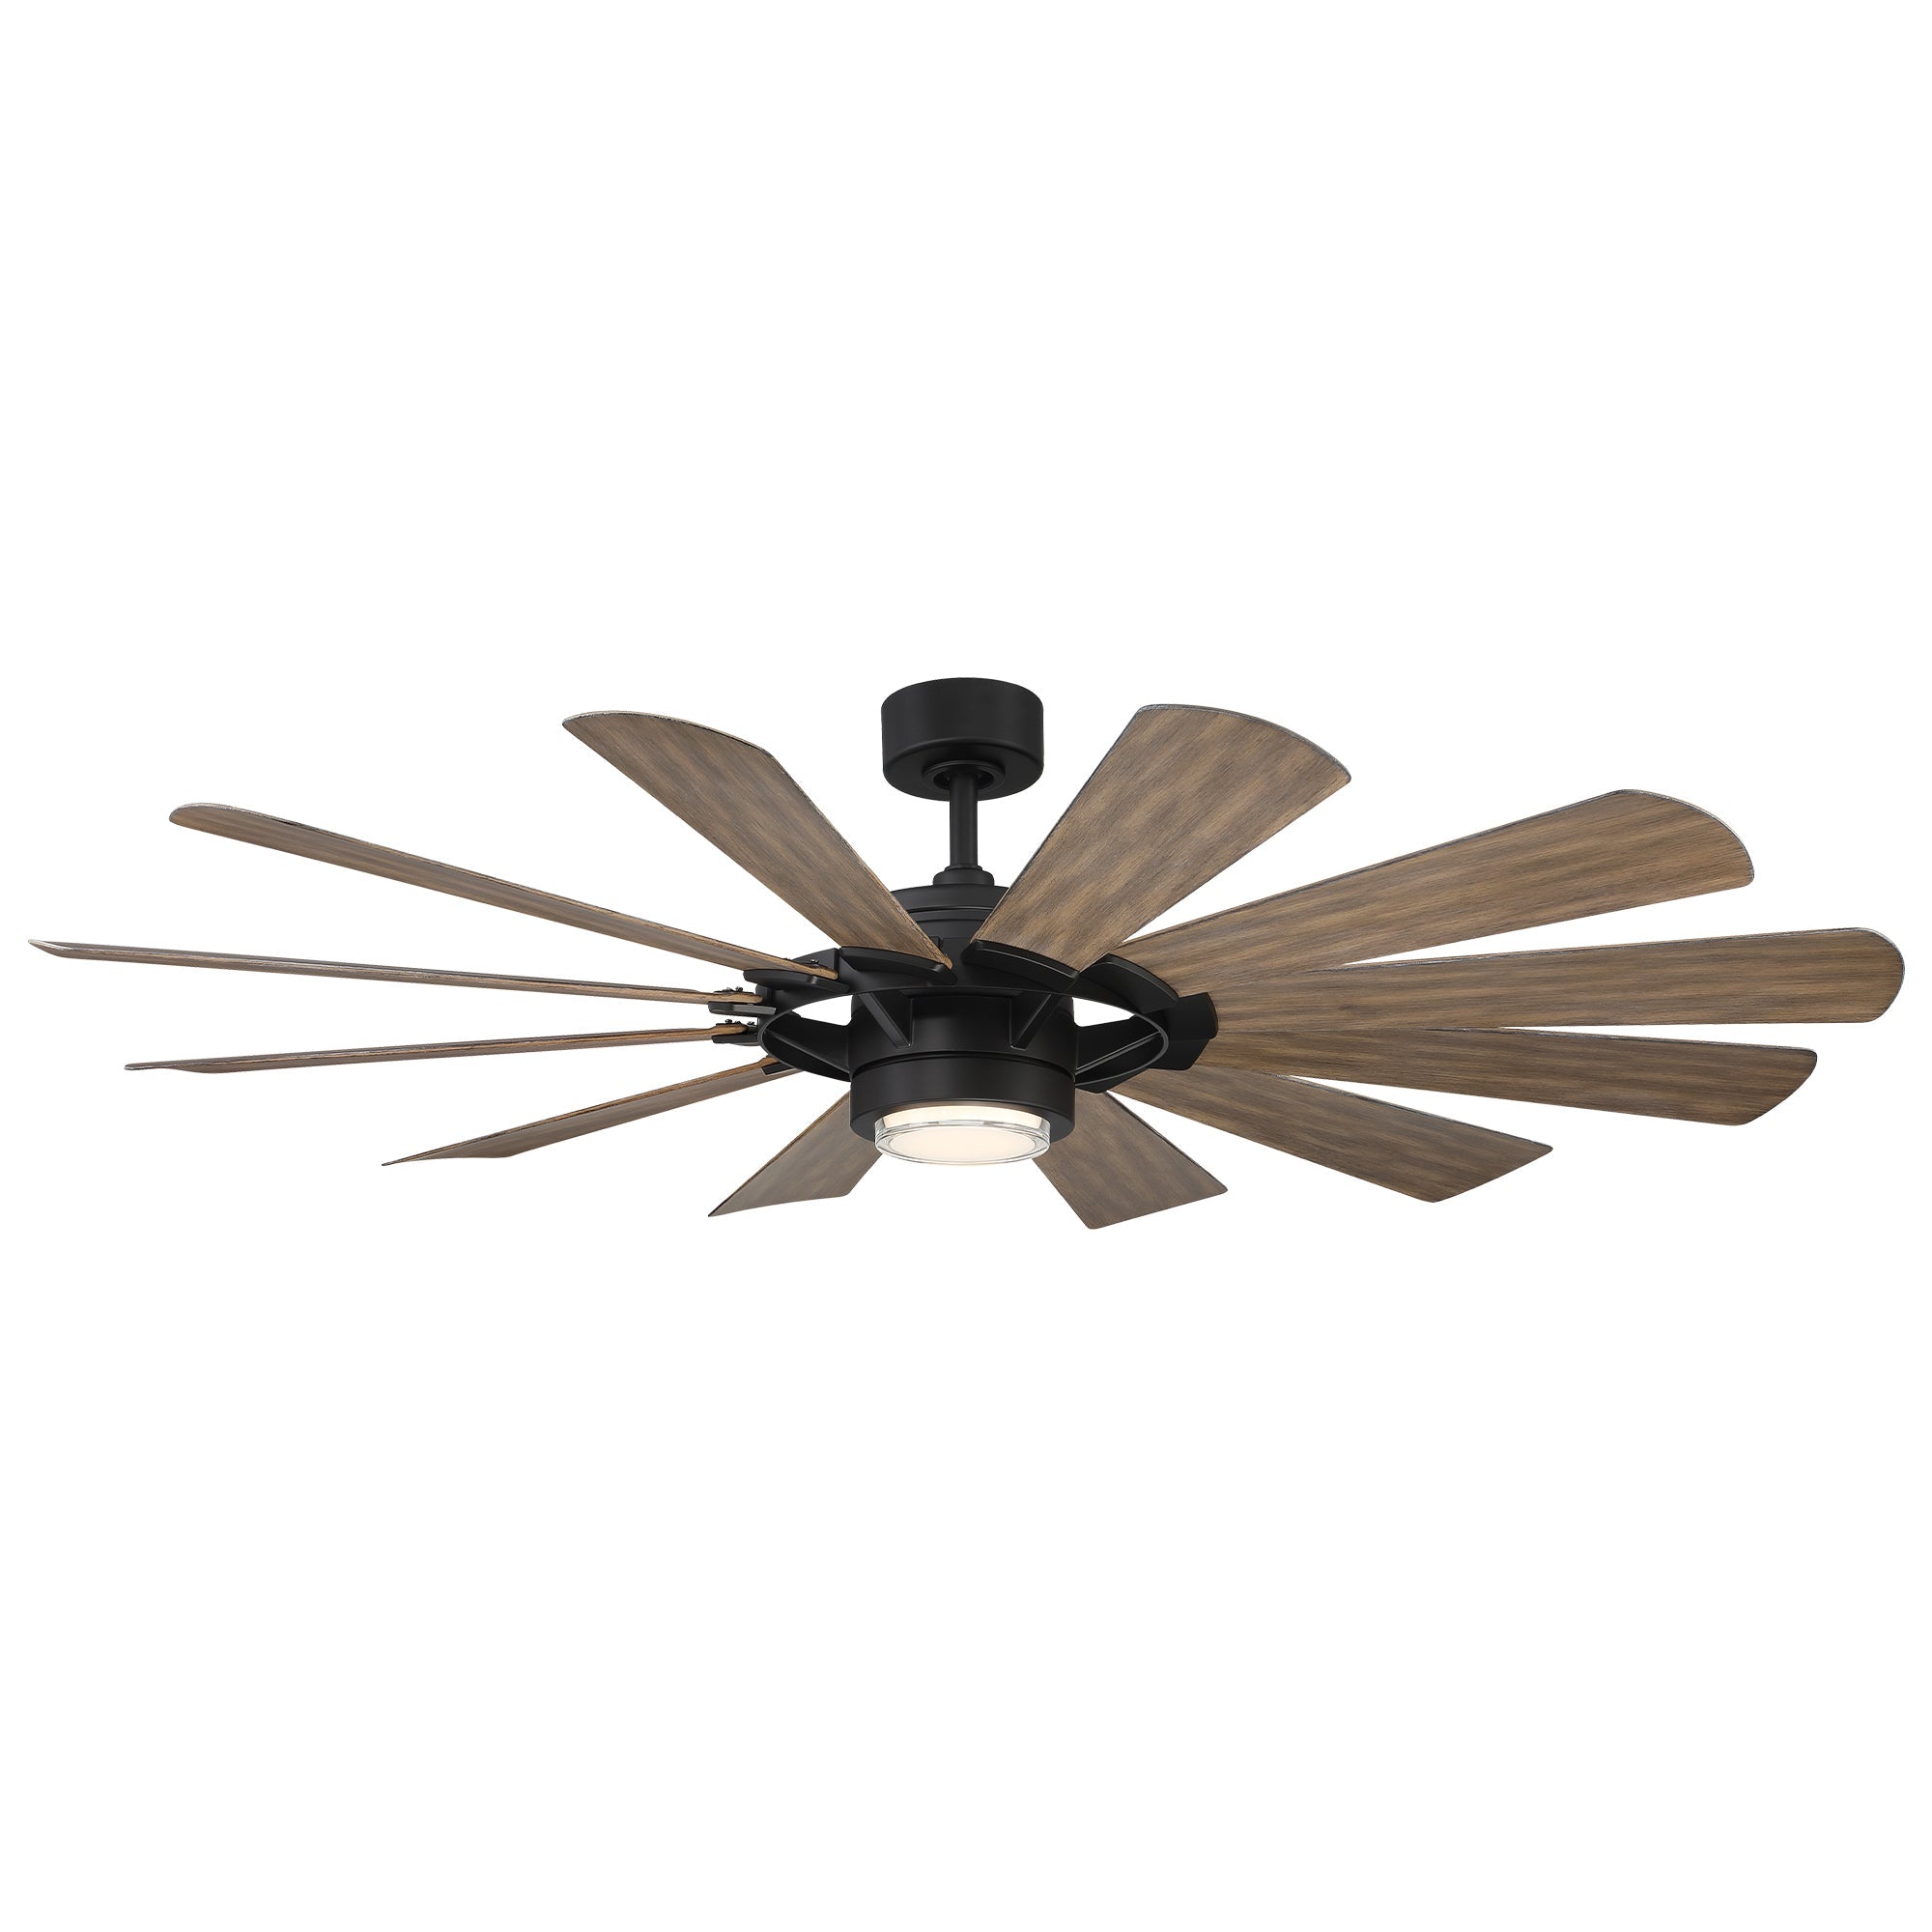 Wyndmill Indoor/Outdoor 12-Blade 65" Smart Ceiling Fan with LED Light Kit and Remote Control